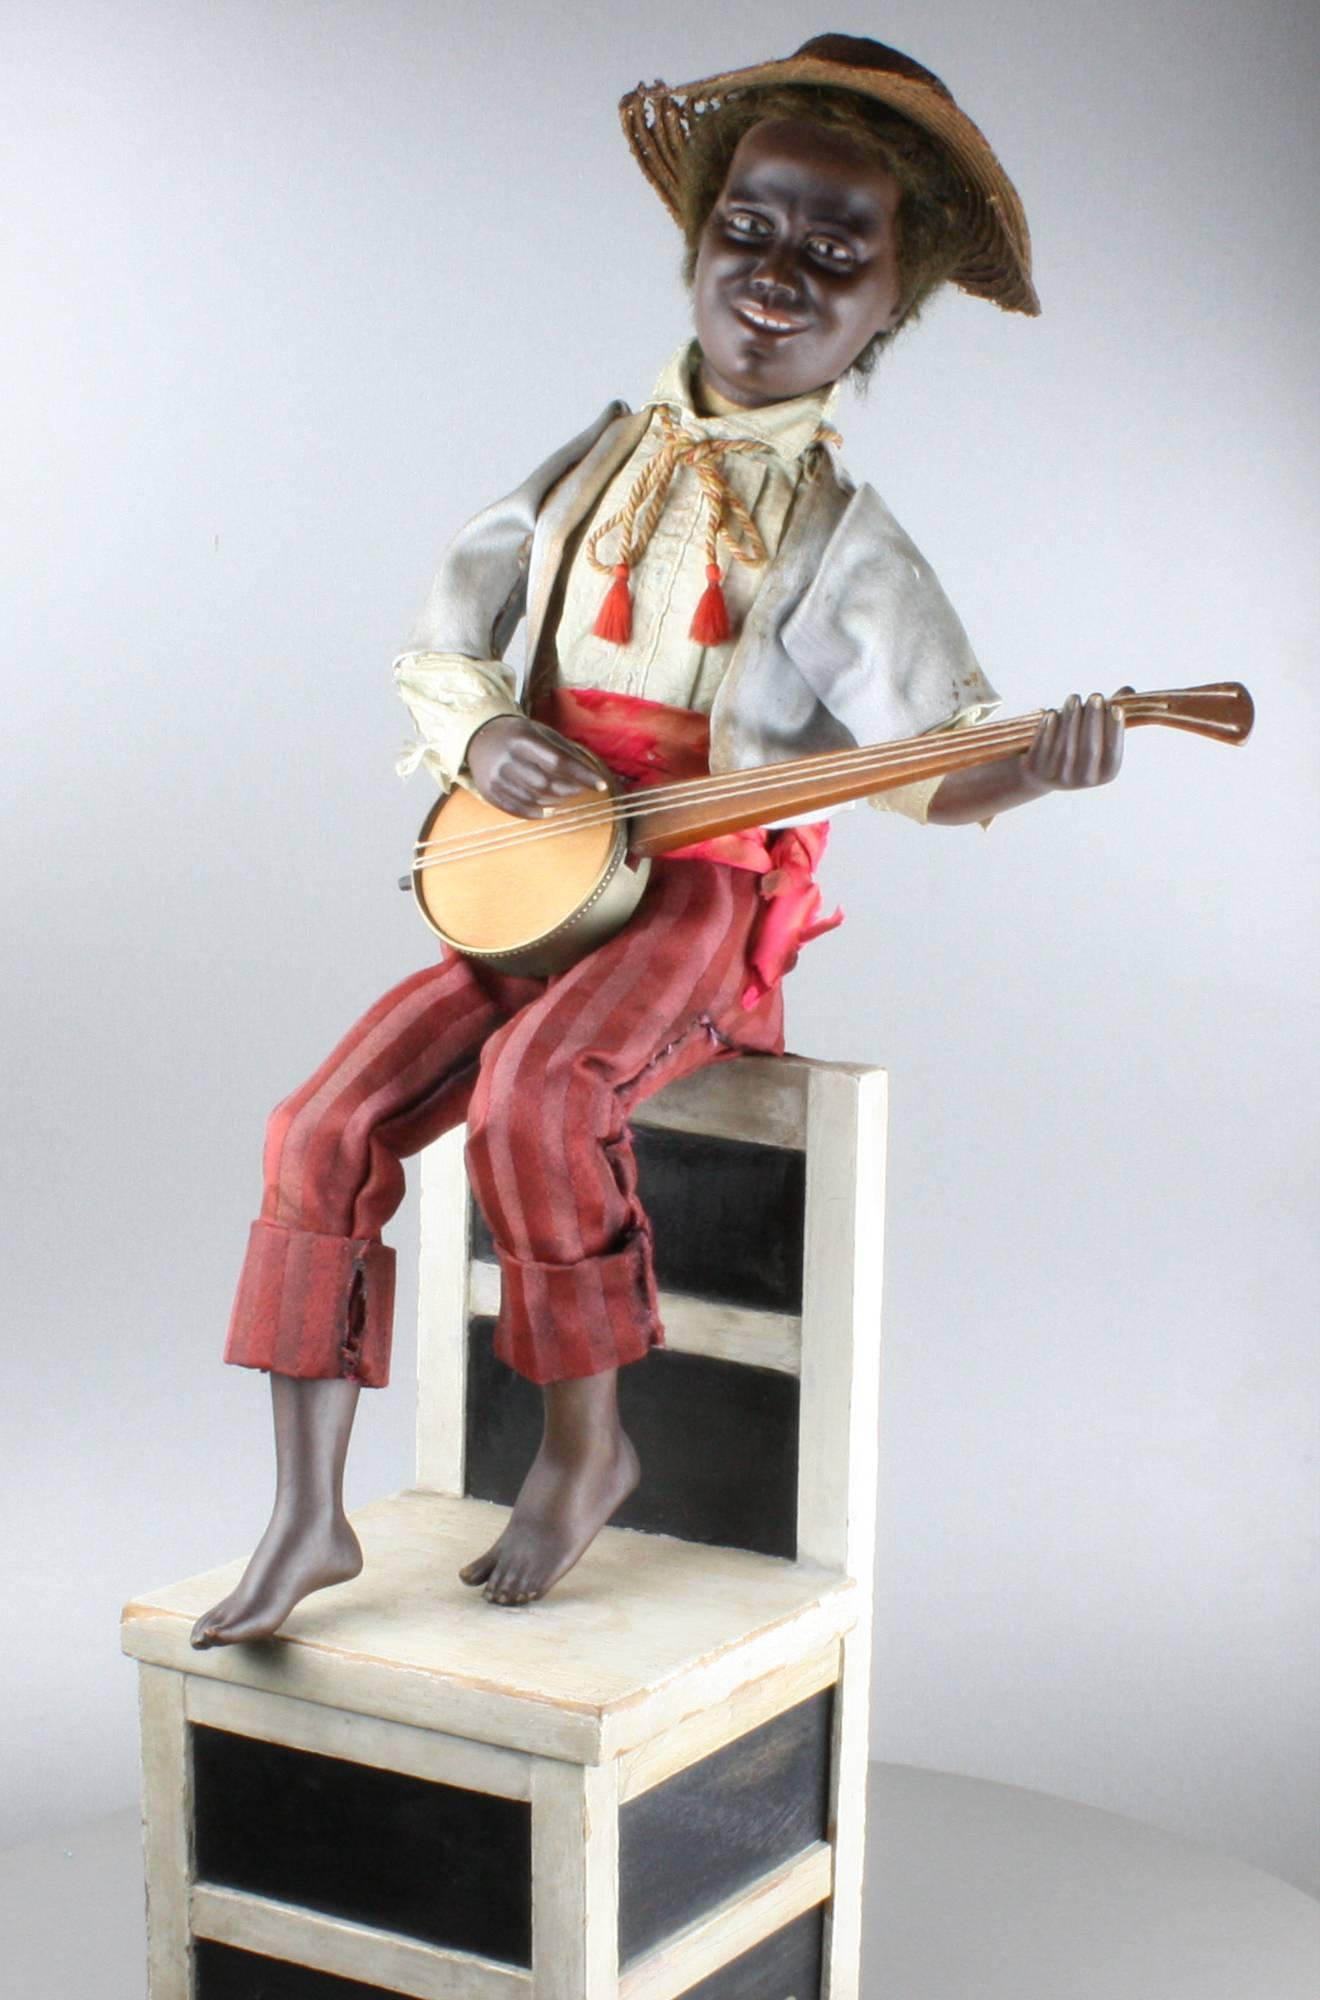 A mesmerising antique black banjo player musical automaton by Gustave Vichy,
 
French,
 
circa 1900.
 
Shown at the Automates Musiciens Exhibition at Palais Lascaris, Nice Carnaval, 1978, object number VII, by Jacques Damiot.
